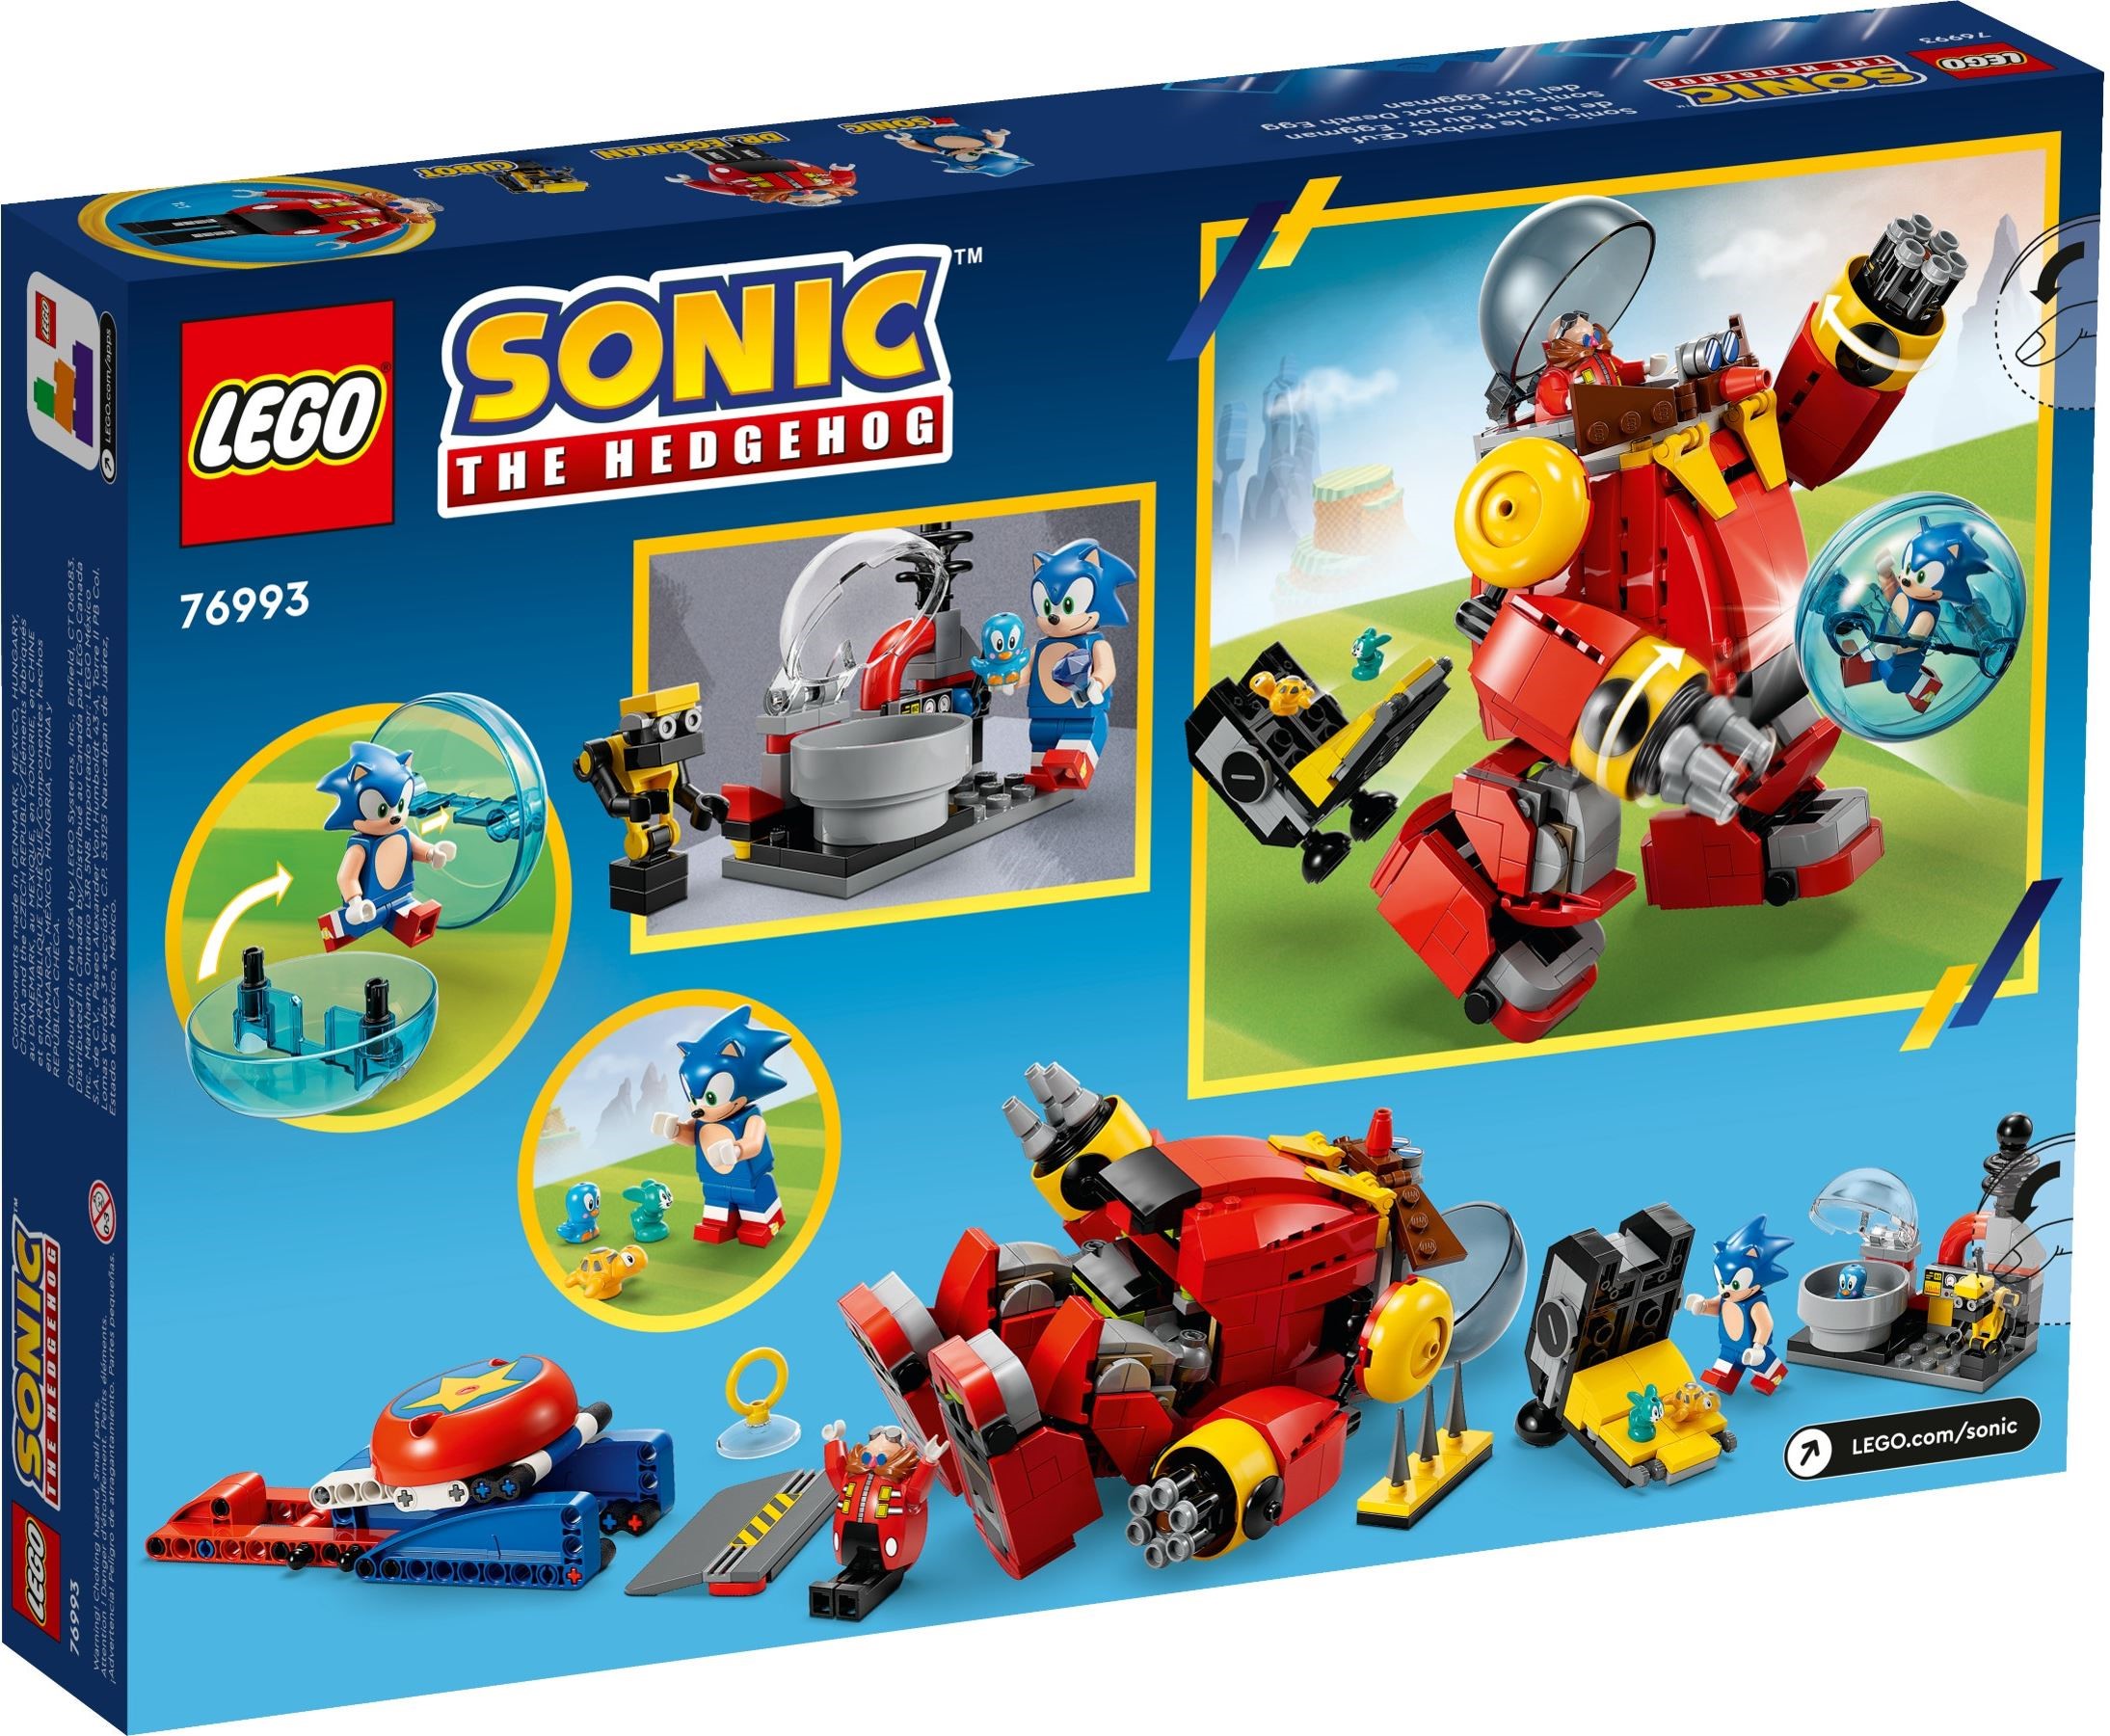 New LEGO Sonic the Hedgehog sets coming in August 2023